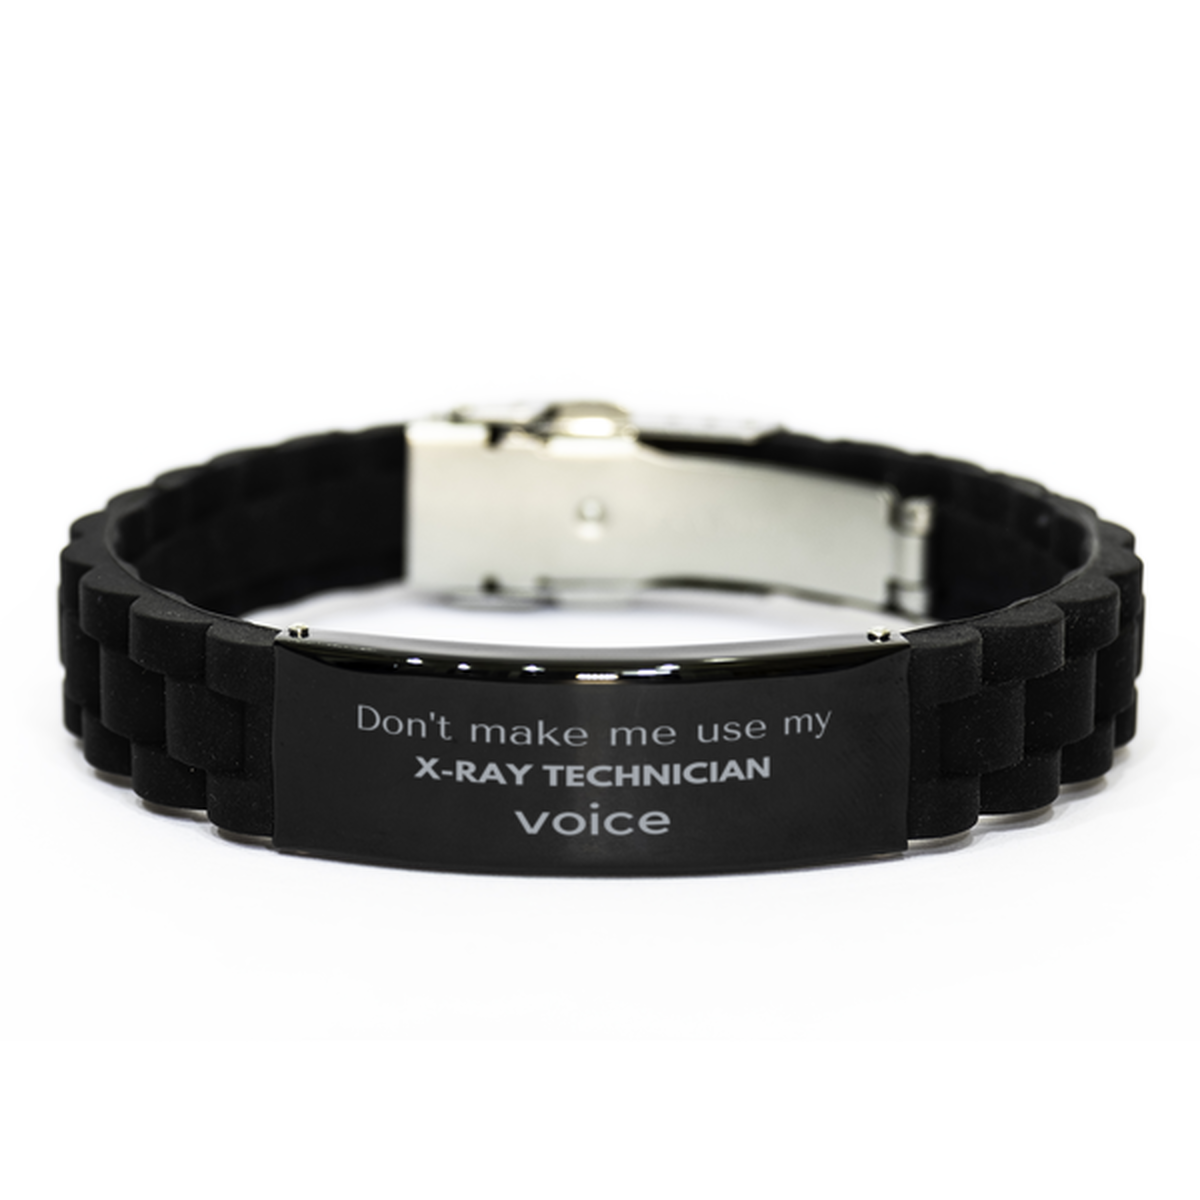 Don't make me use my X-Ray Technician voice, Sarcasm X-Ray Technician Gifts, Christmas X-Ray Technician Black Glidelock Clasp Bracelet Birthday Unique Gifts For X-Ray Technician Coworkers, Men, Women, Colleague, Friends